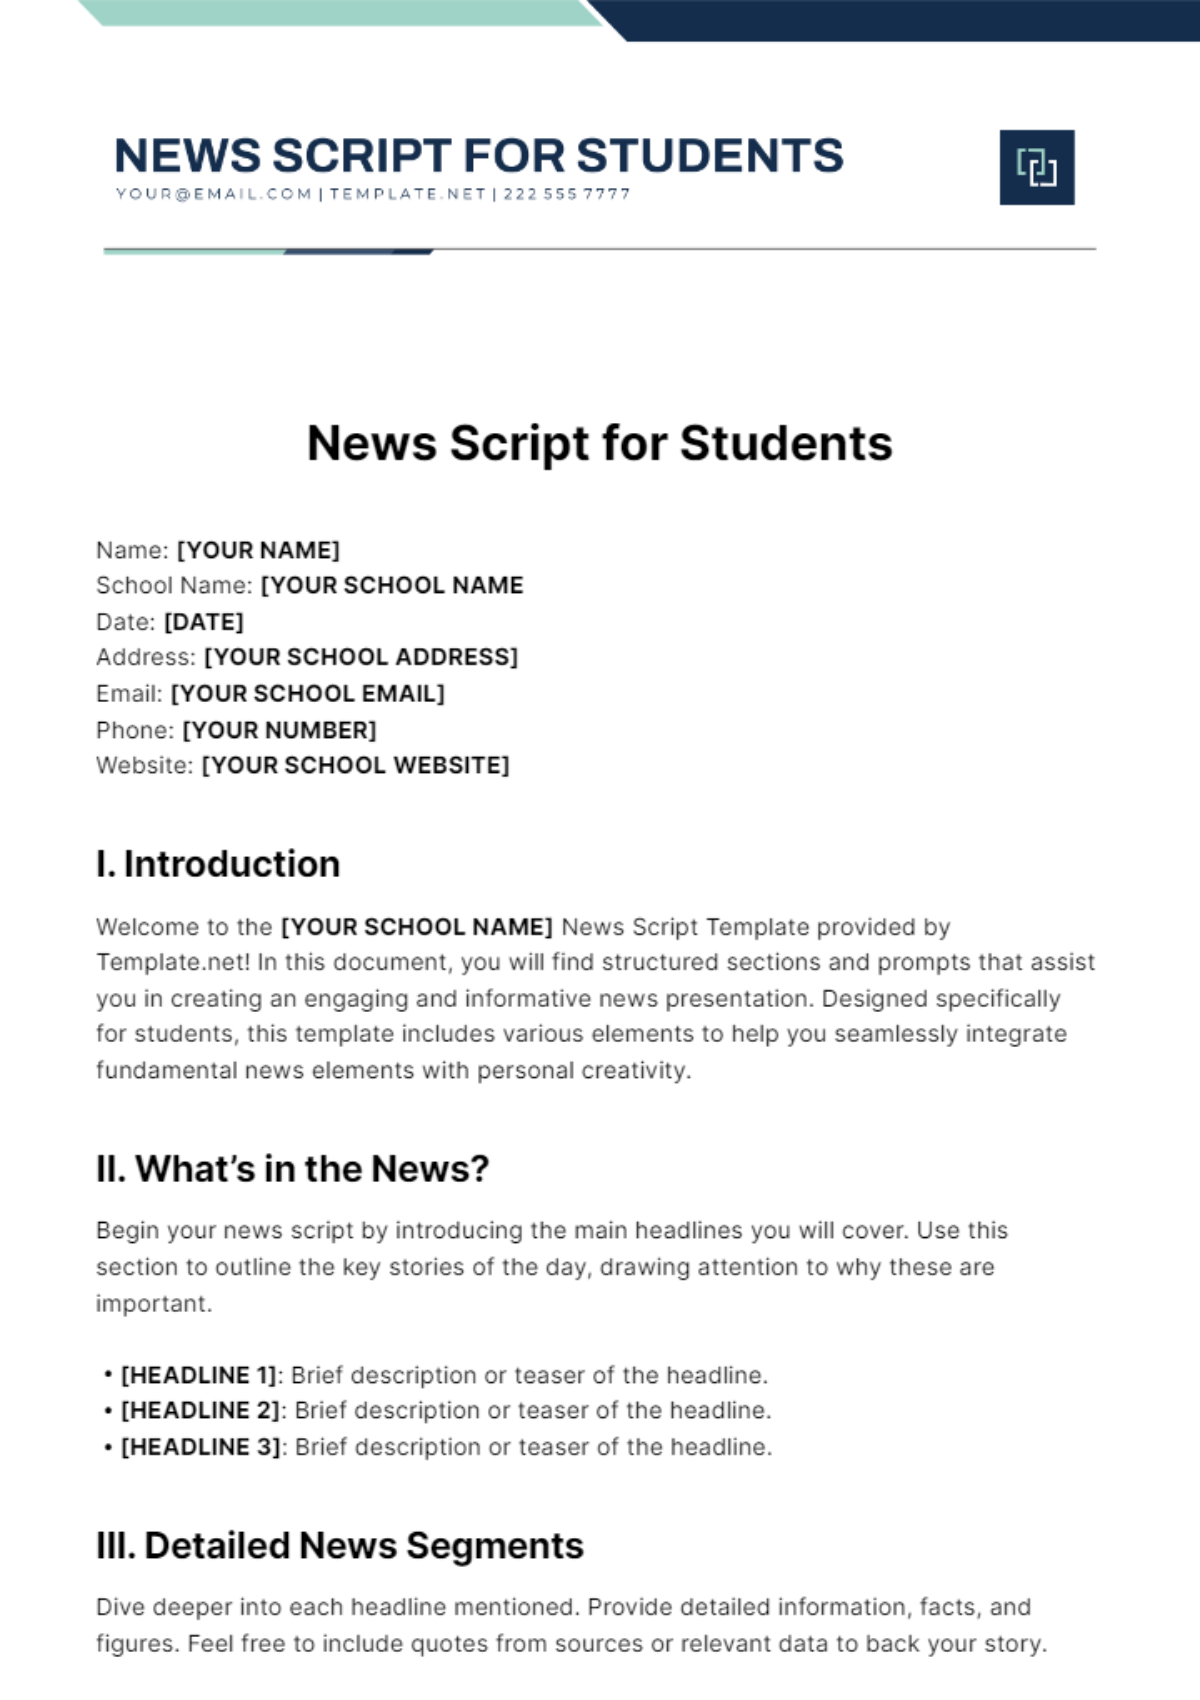 News Script For Students Template